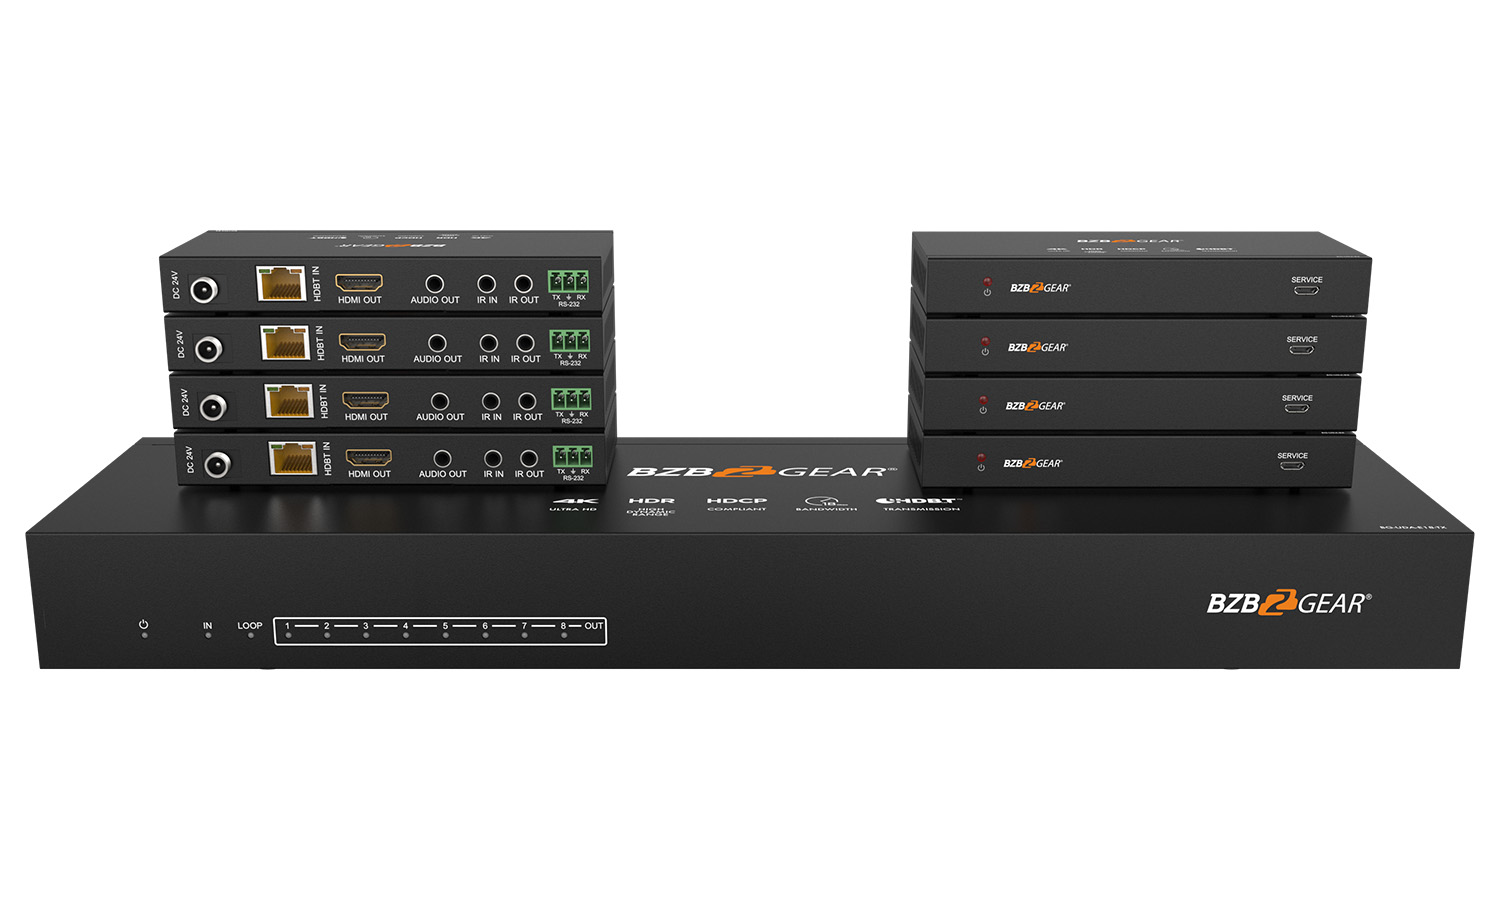 BG-UDA-E18 1X8 4K UHD 18Gbps HDMI HDBaseT Splitter/Distribution Amplifier over Category Cable by BZBGEAR